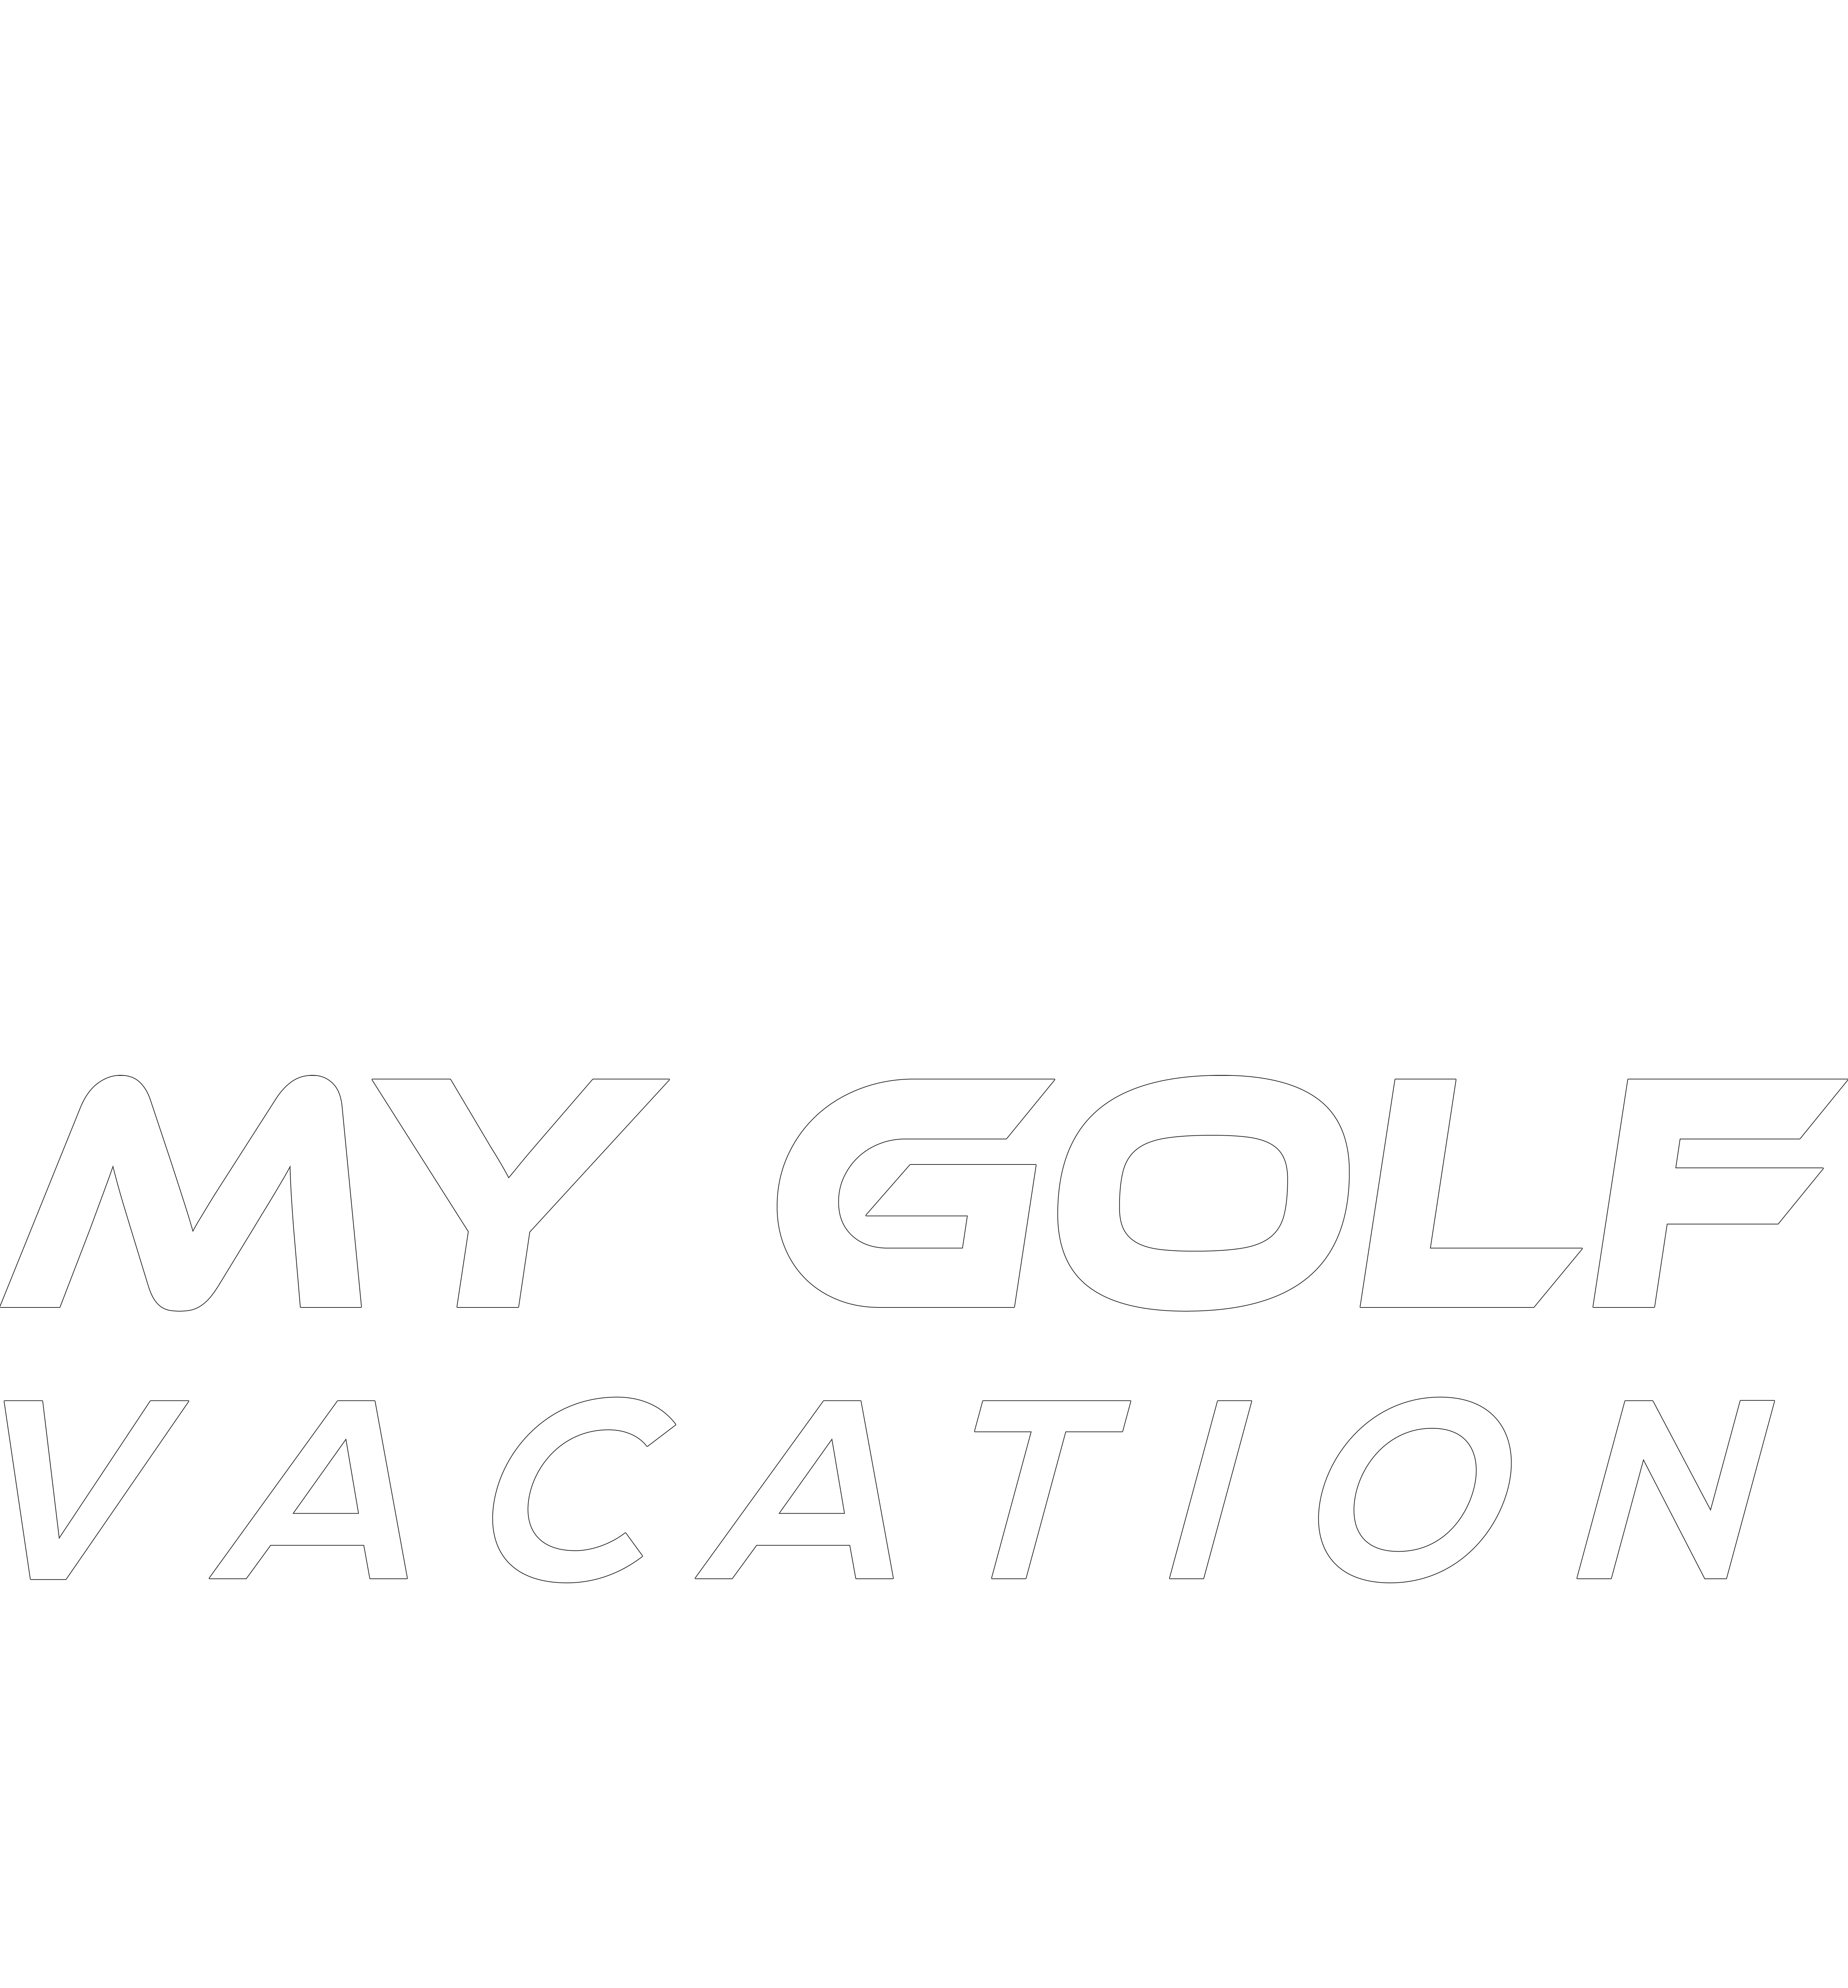 Golf Vacation Packages at My Golf Vacation